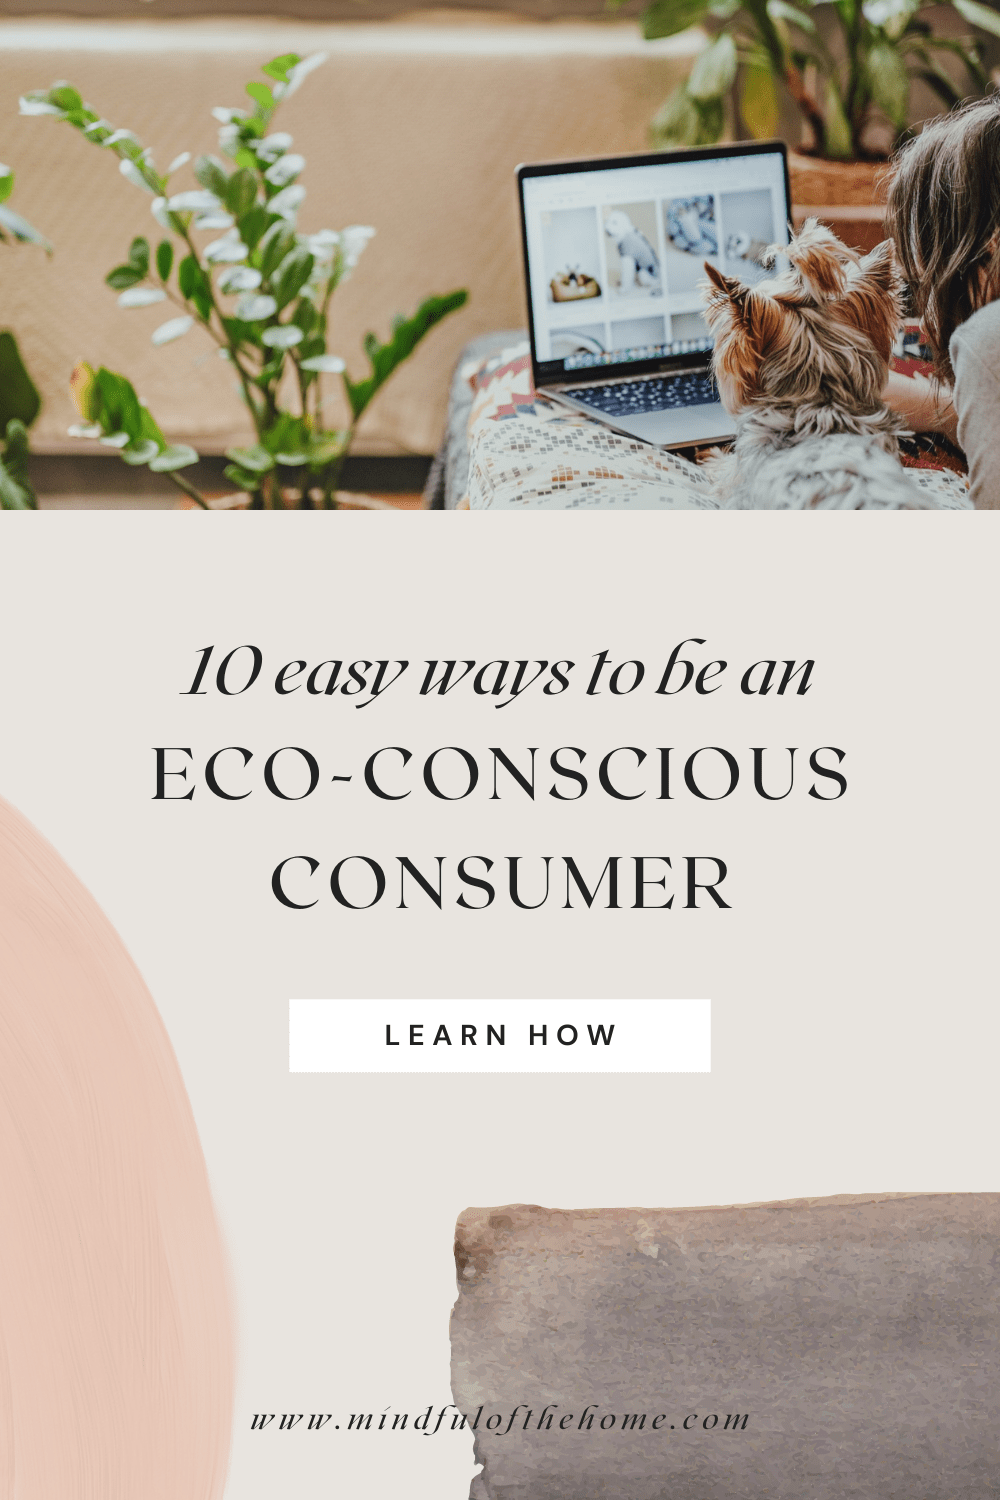 14 Tips to get your Eco-Conscious Business Found Online